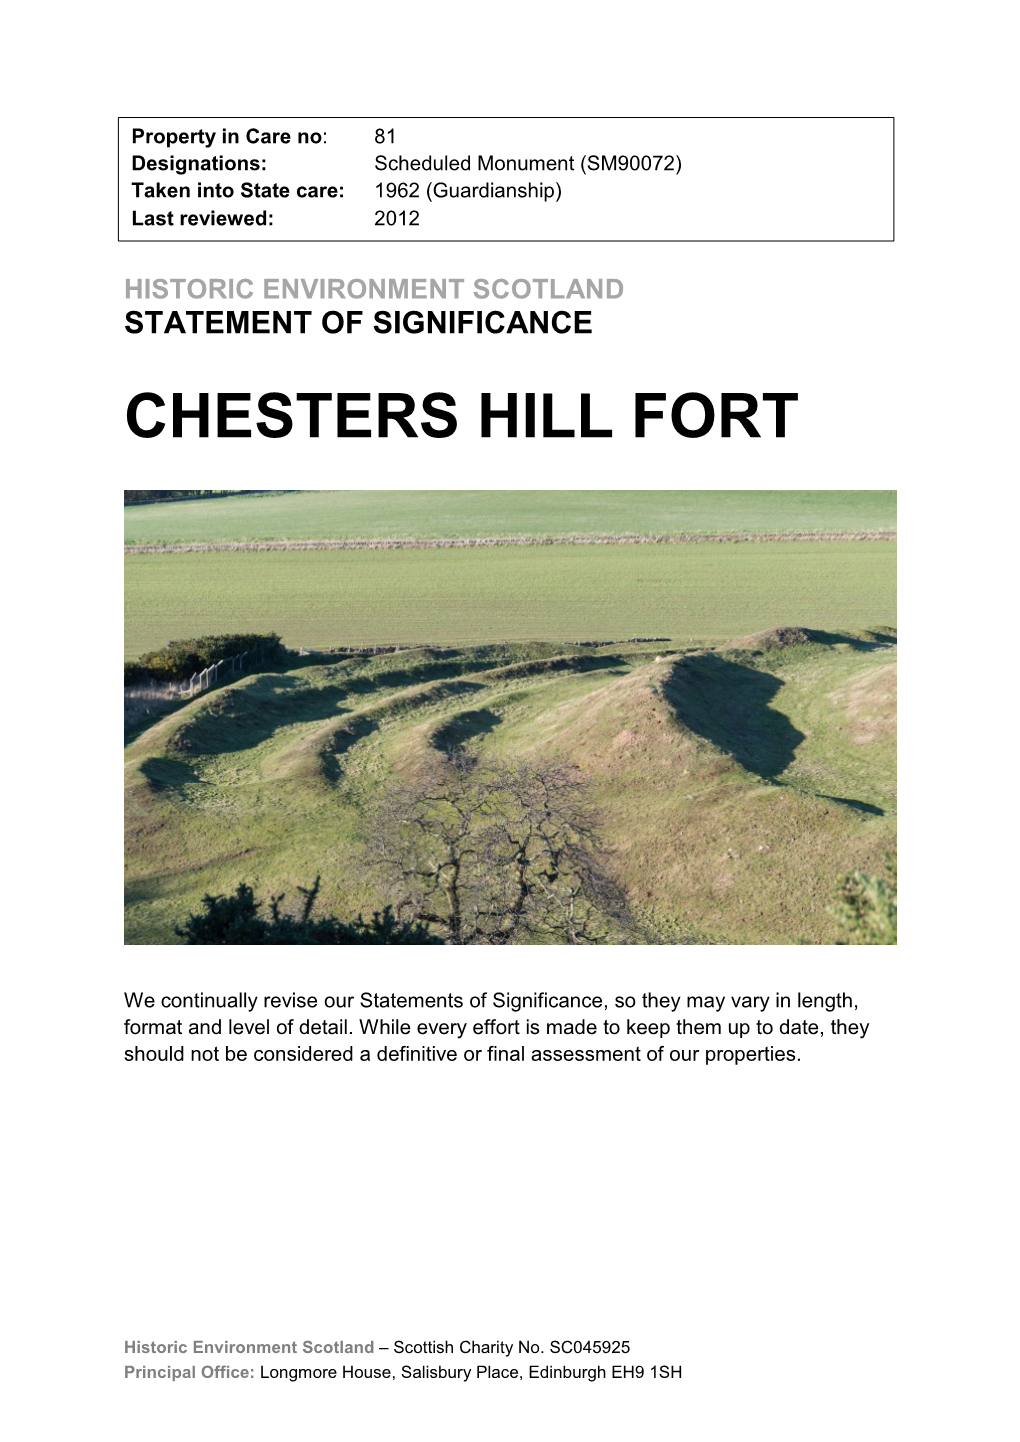 Chesters Hill Fort